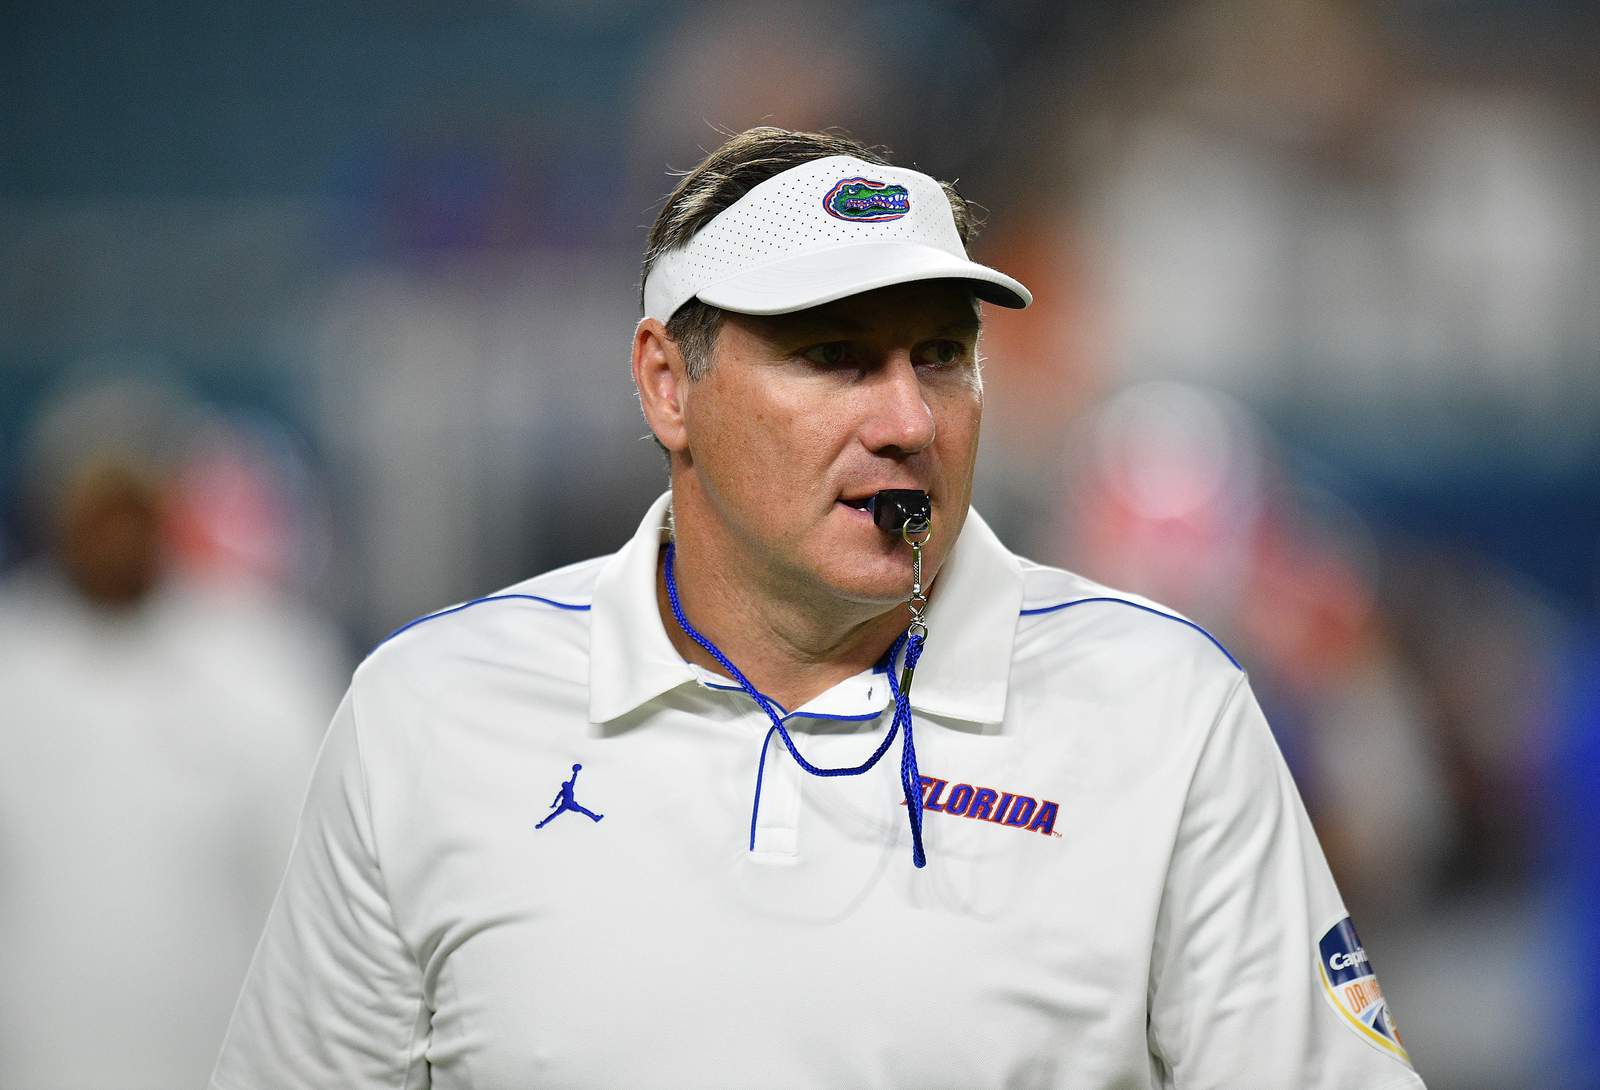 Mullen’s Florida staff receives nearly $500K before pandemic